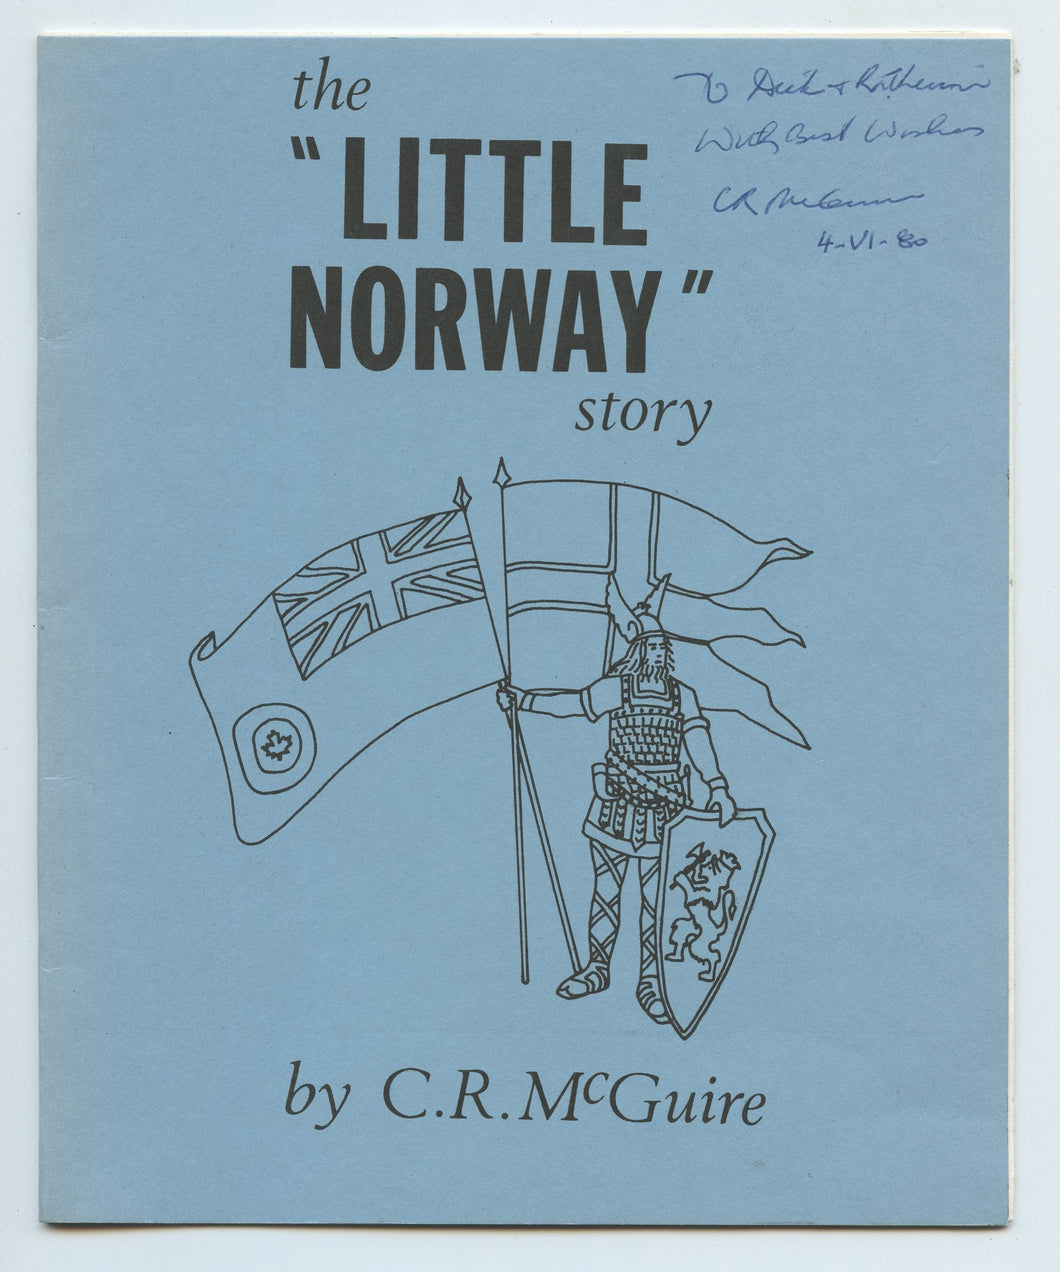 The "Little Norway" Story